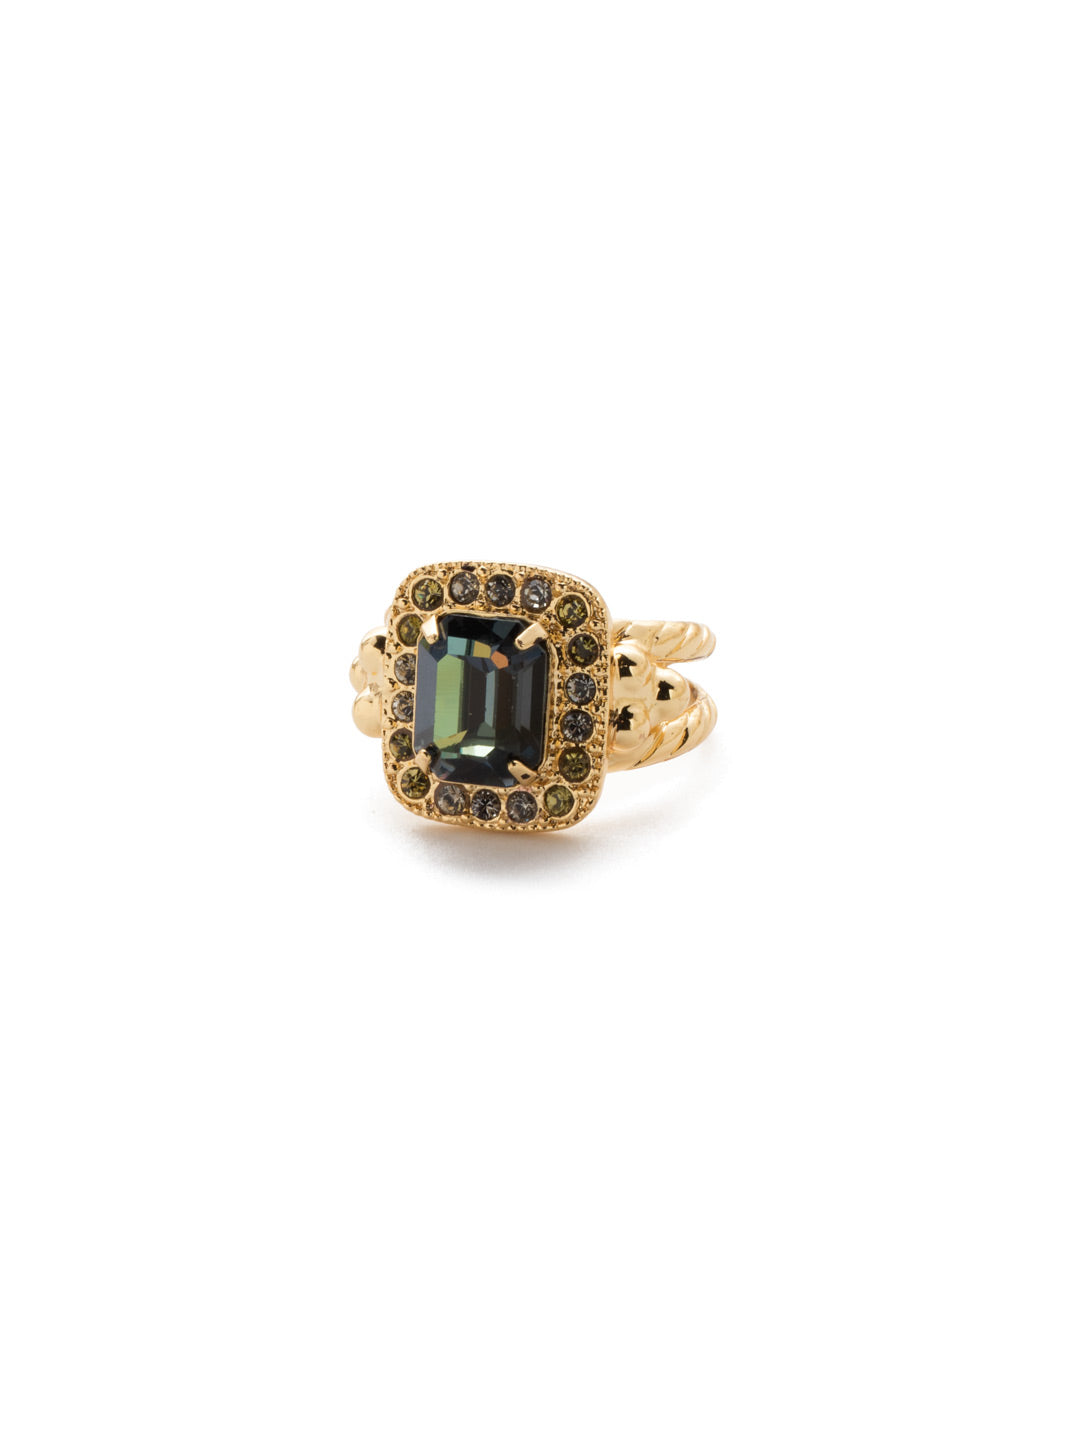 Opulent Octagon Cocktail Ring - RDQ41BGCSM - A central crystal surrounded by petite gems perches atop an adjustable double band. From Sorrelli's Cashmere collection in our Bright Gold-tone finish.